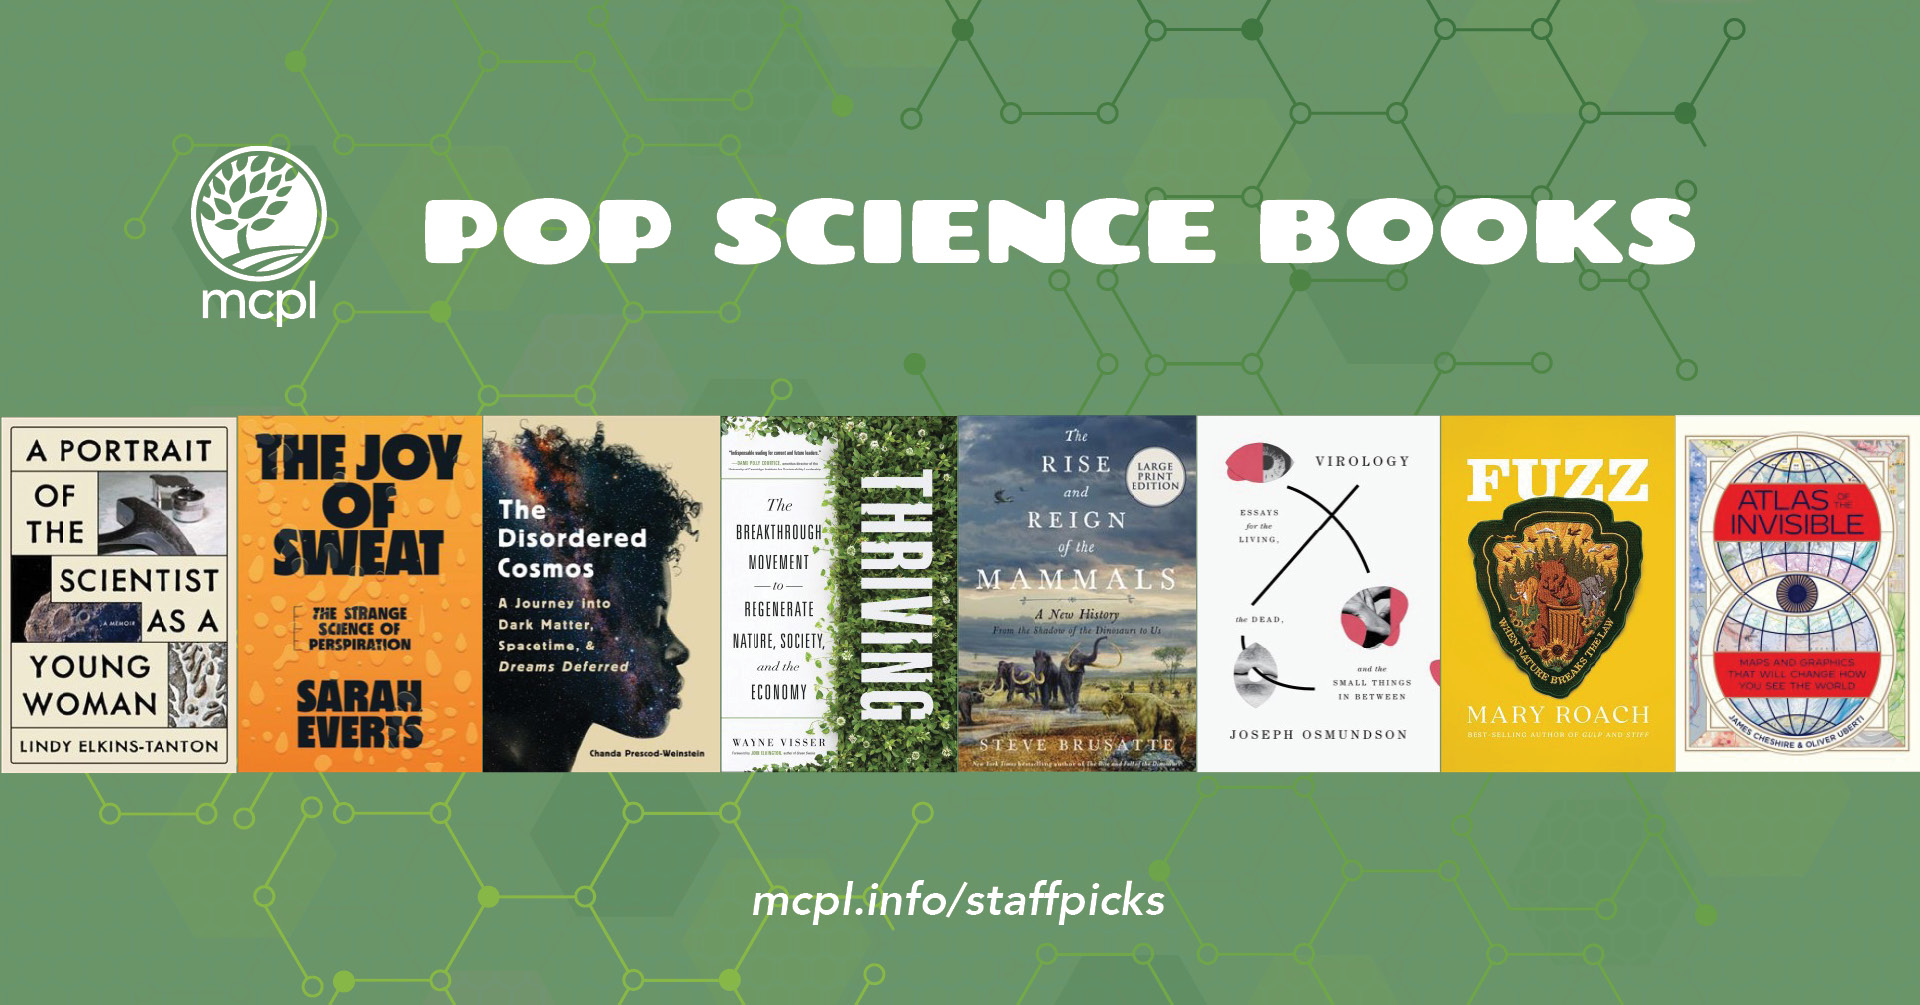 Collage of book covers from the list. Text reads "Pop Science Books"